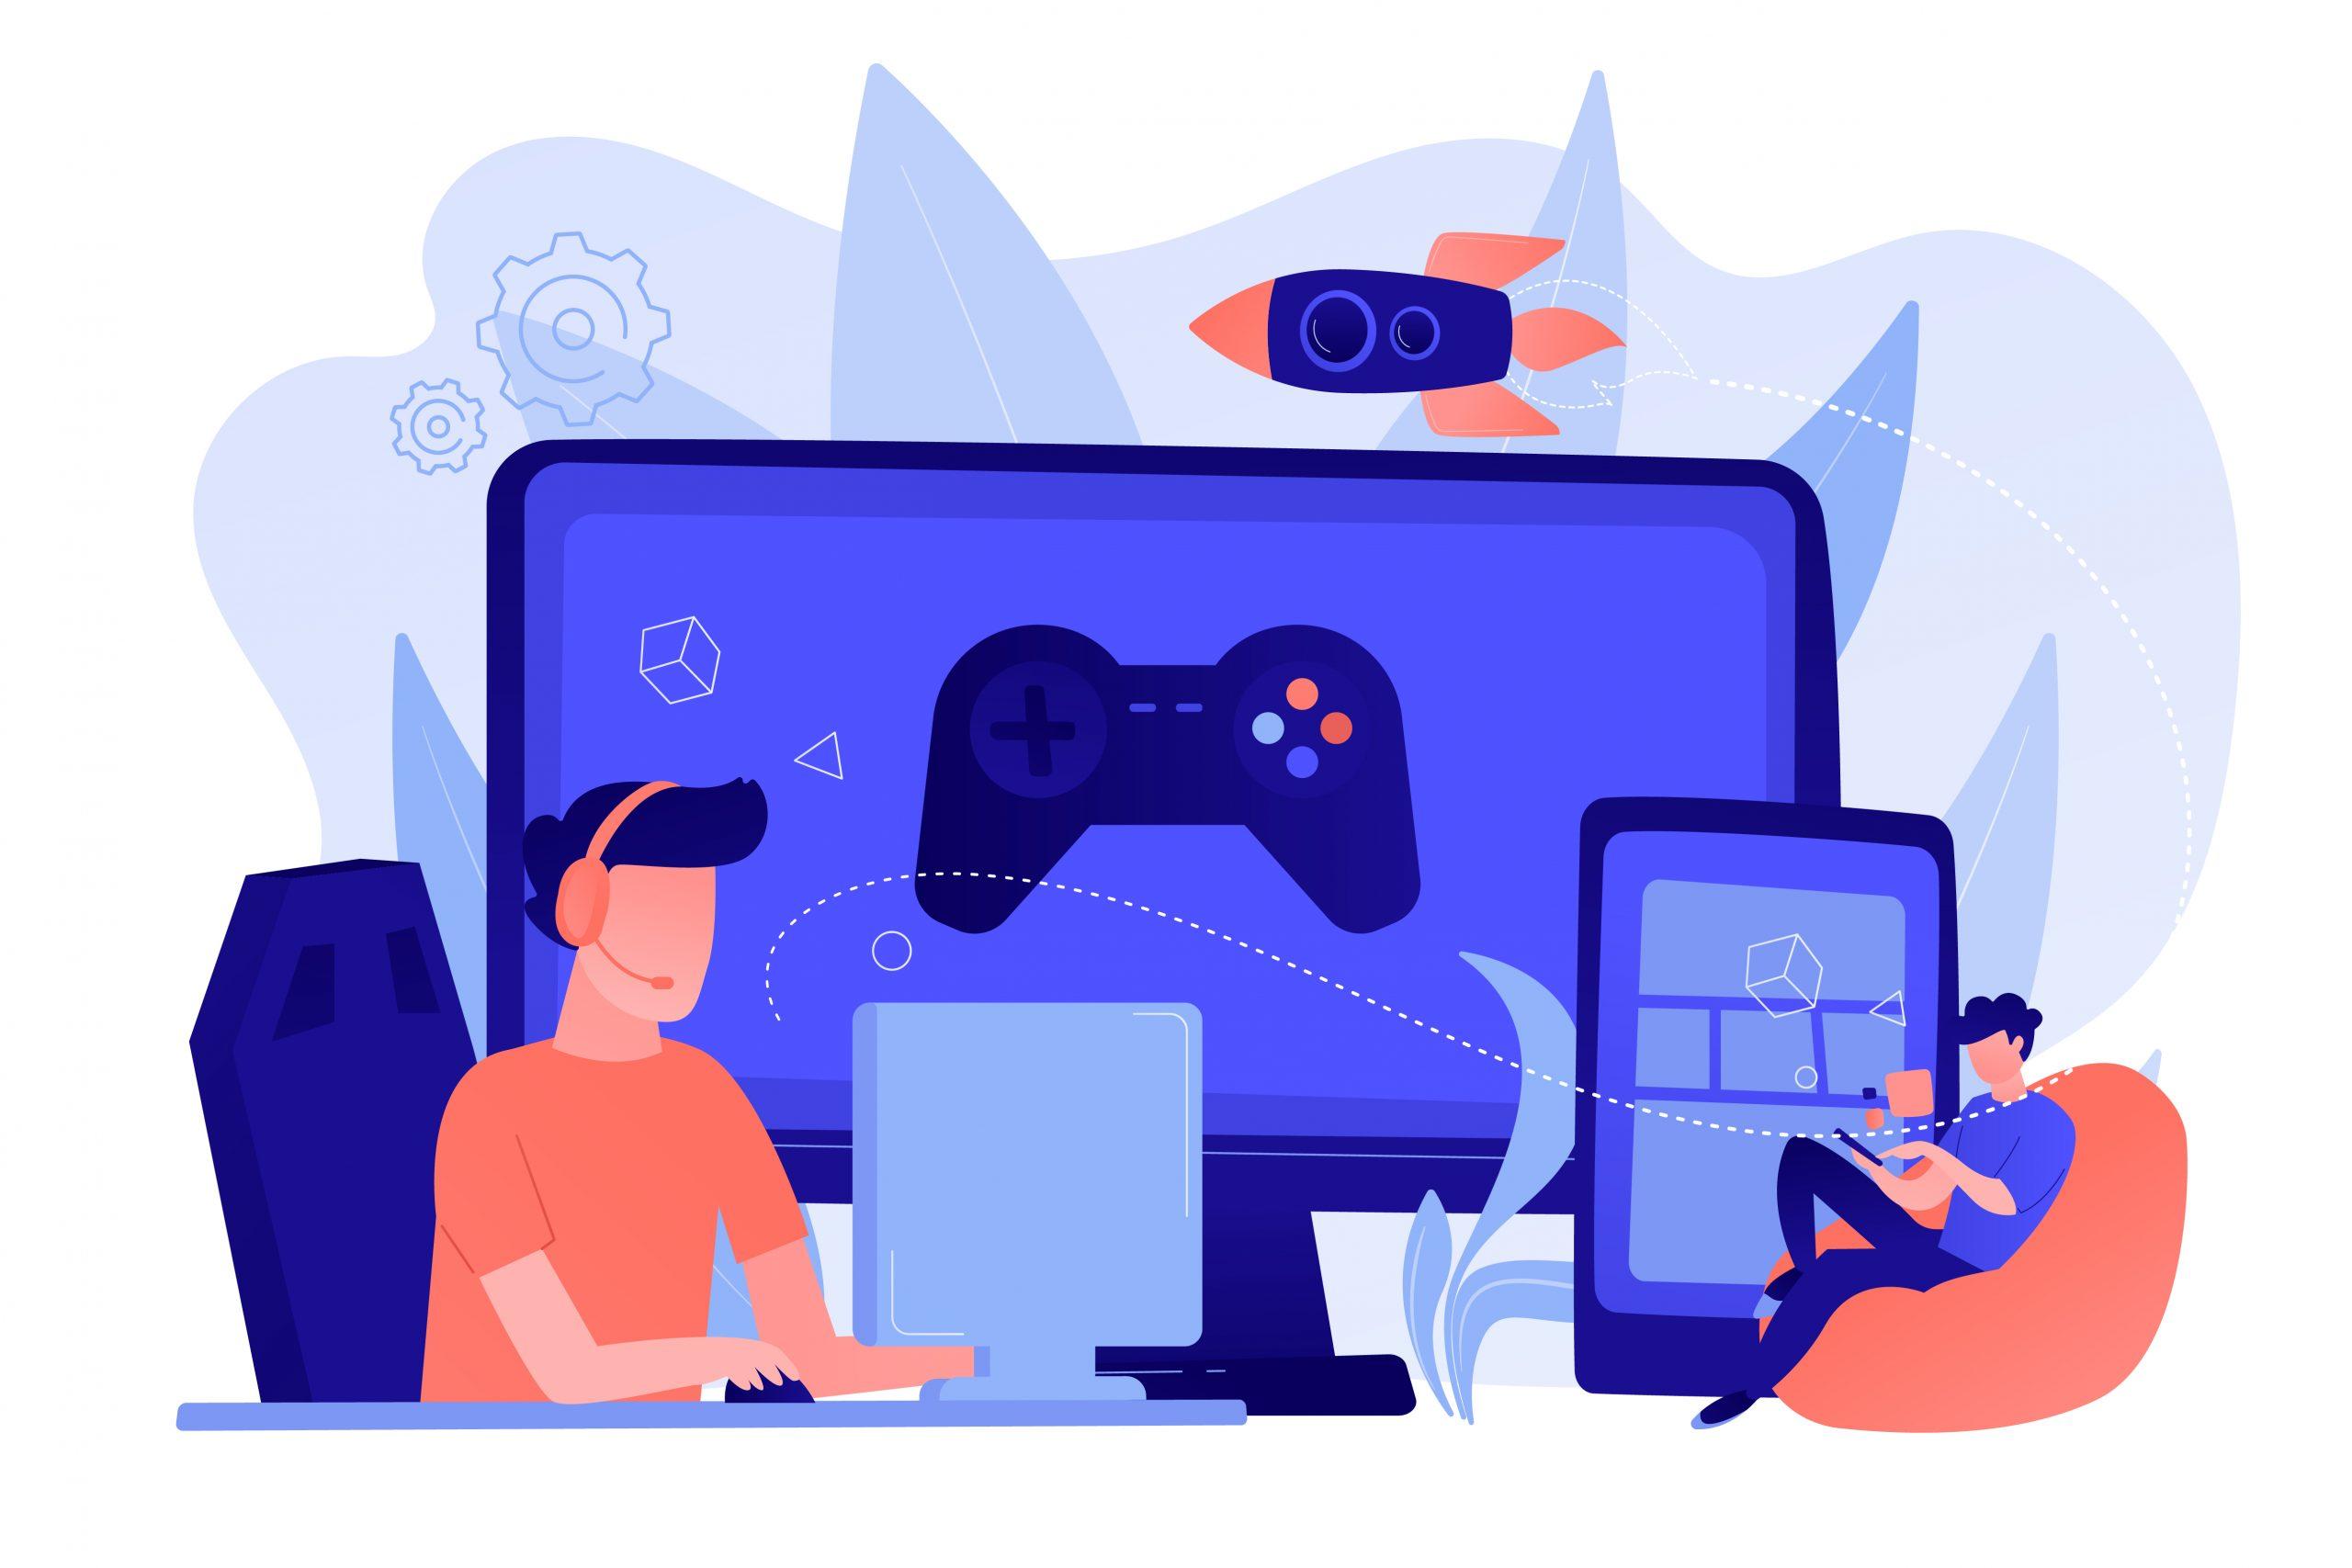 Gamers play video game on different hardware platforms. Cross-platform play, cross-play and cross-platform gaming concept on white background. Pinkish coral bluevector isolated illustration